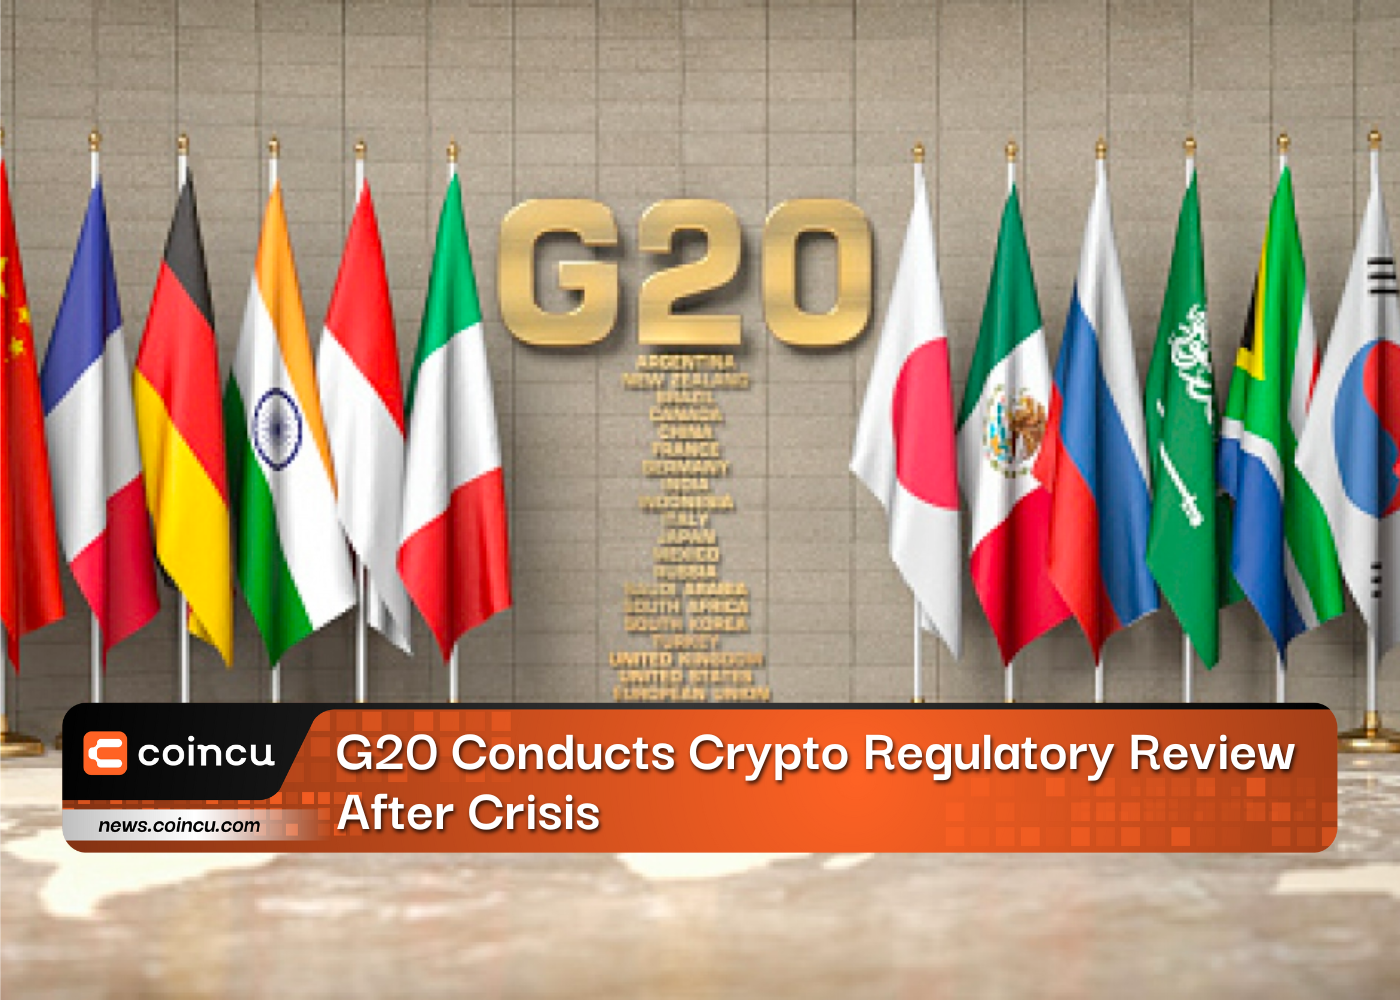 G20 Conducts Crypto Regulatory Review After Crisis